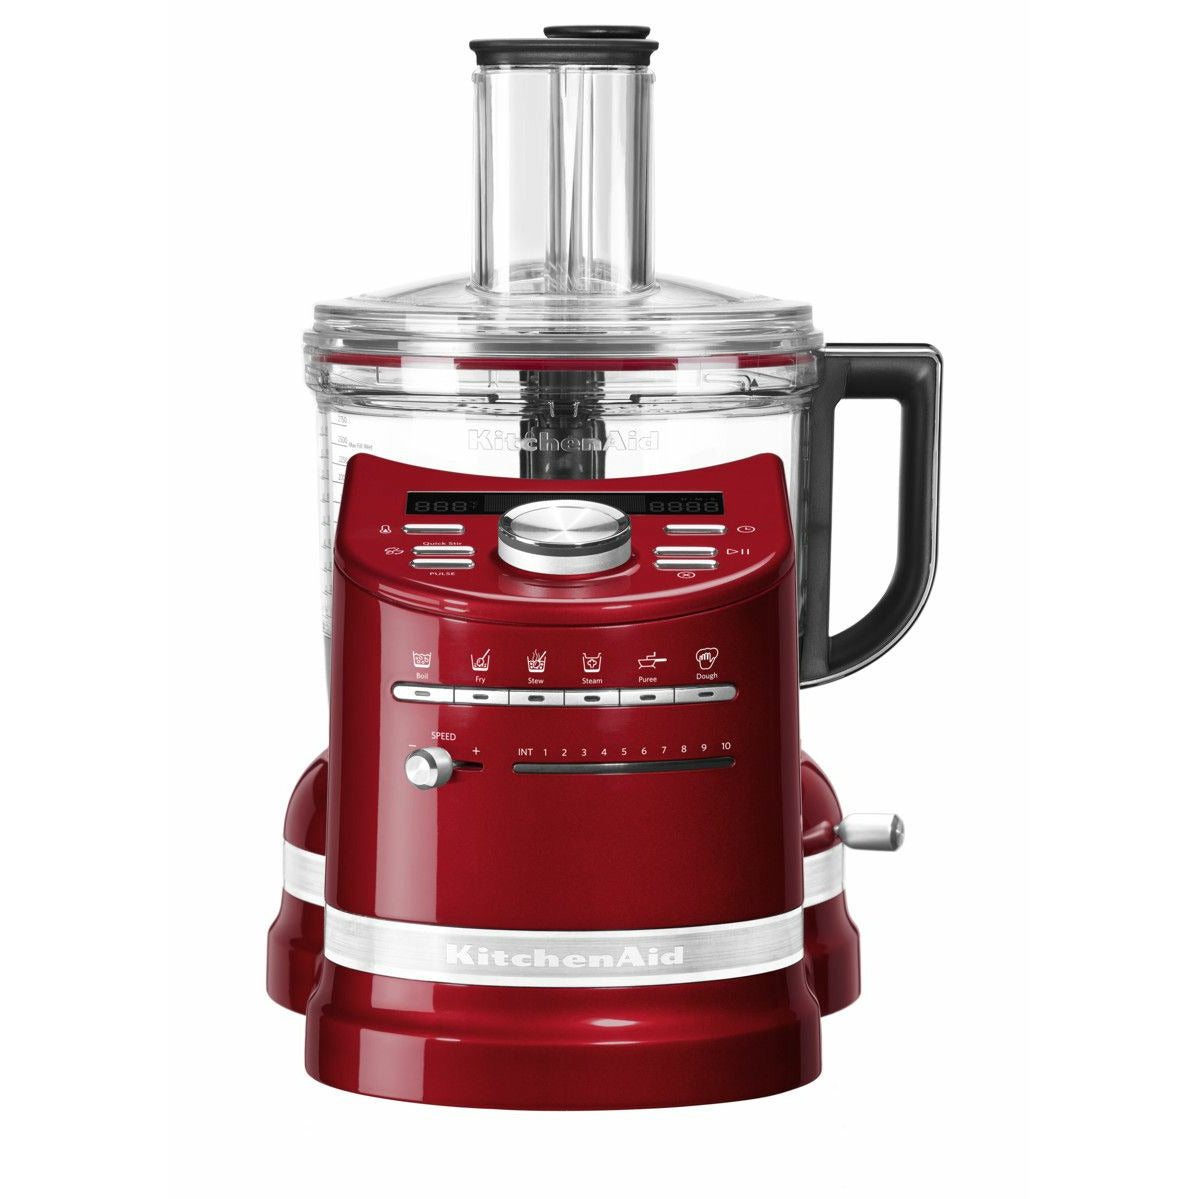 Kitchen Aid 5 Kcf0104 Artisan Cook Processor, Empire Red